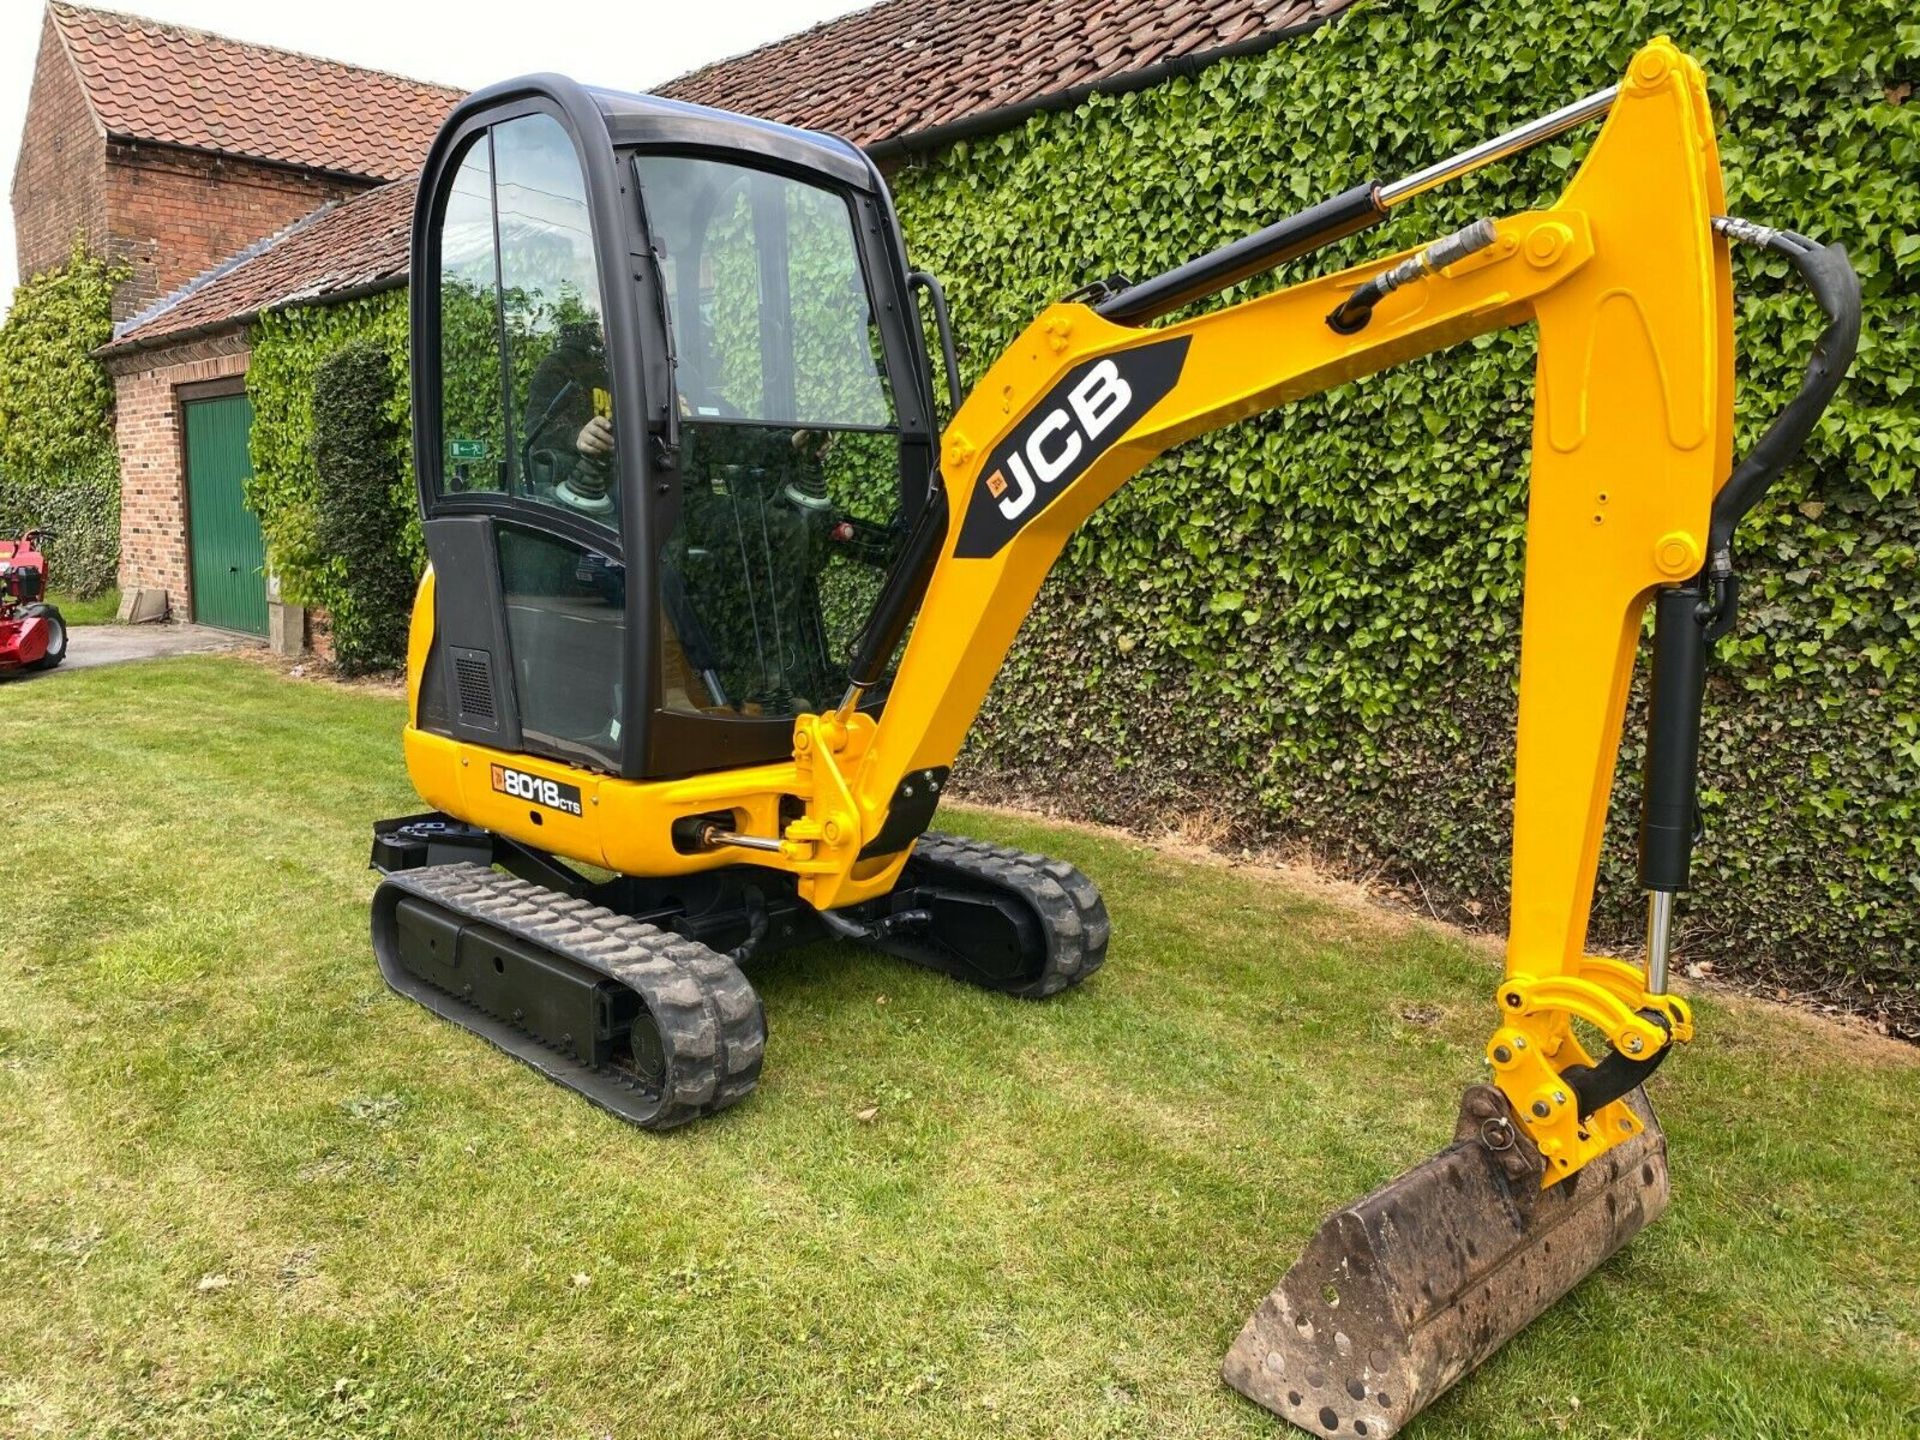 JCB 8018 CTS MINI DIGGER, YEAR 2012, ONLY 1680 HOURS, C/W 3 BUCKETS, EXPANDING TRACKS, QUICK HITCH - Image 4 of 11